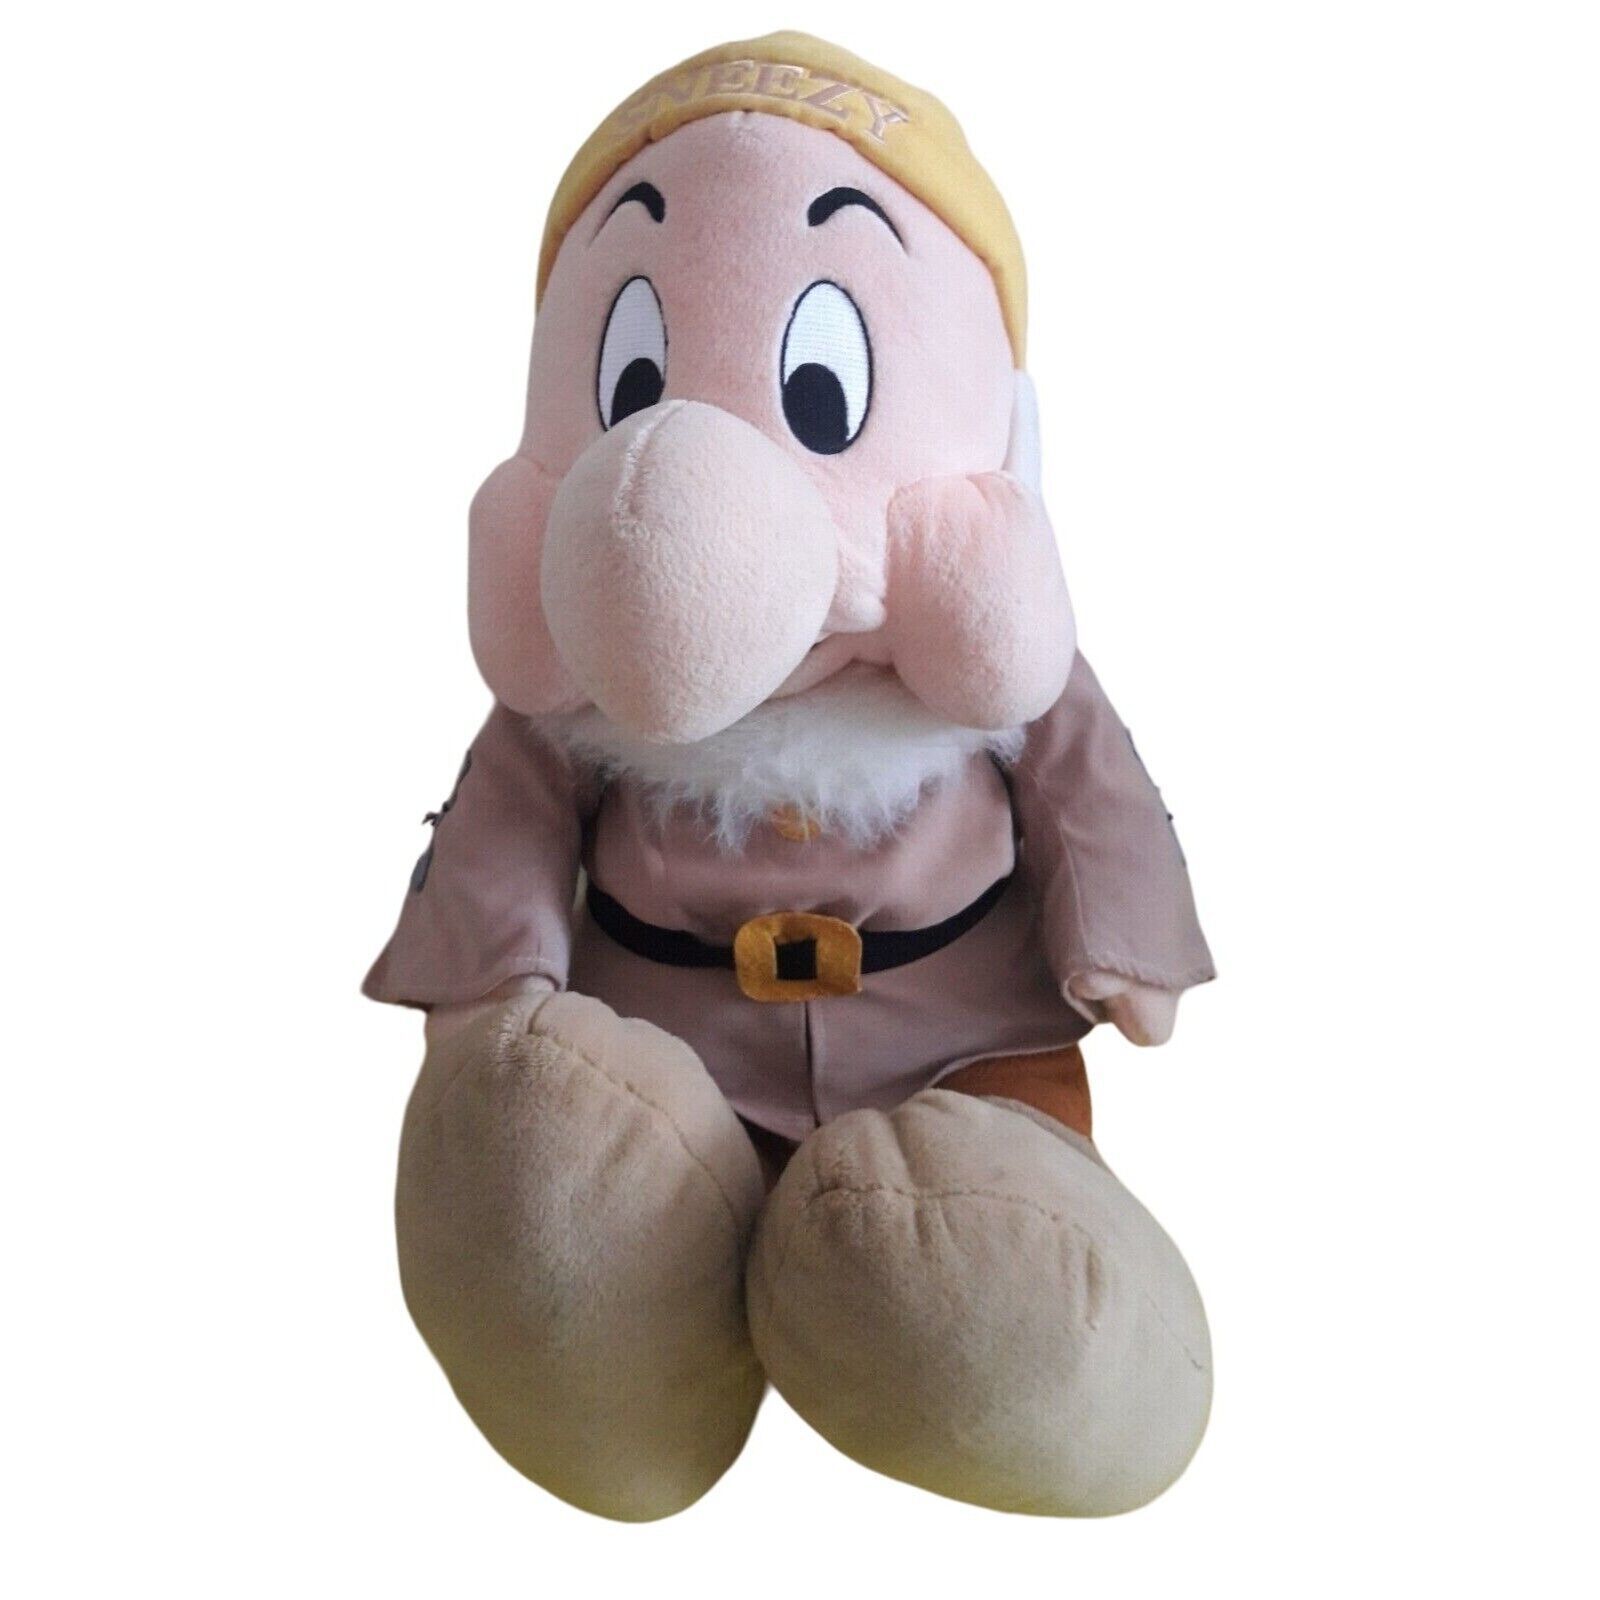 Primary image for Disney Store Sneezy Dwarf Plush Large 24" Snow White And Seven Dwarfs Stuffed